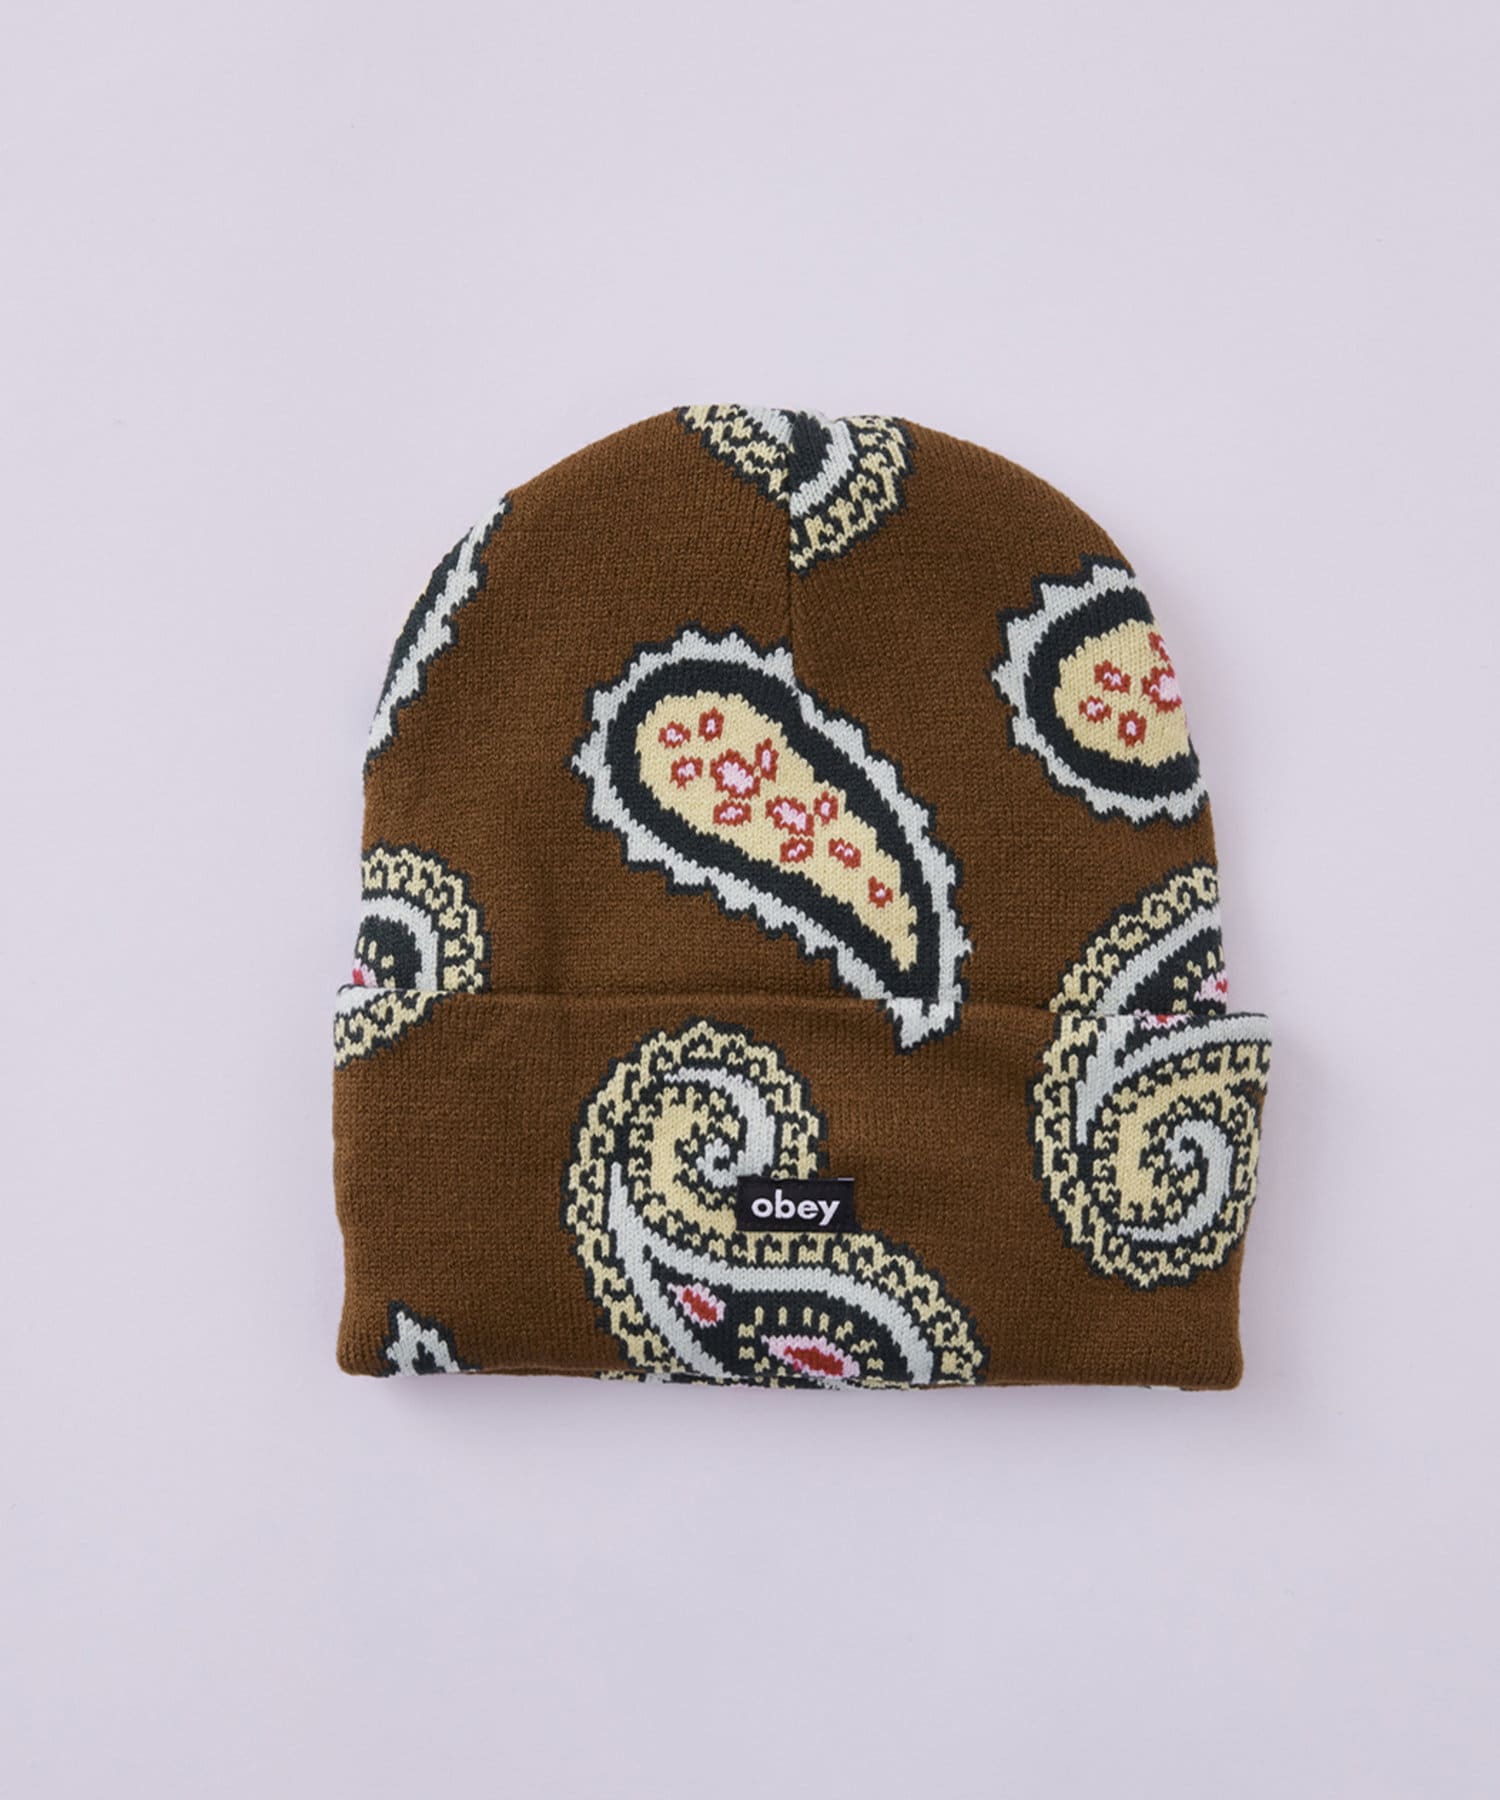 WHO’S WHO gallery(フーズフーギャラリー) OBEY PAISLEY BEANIE